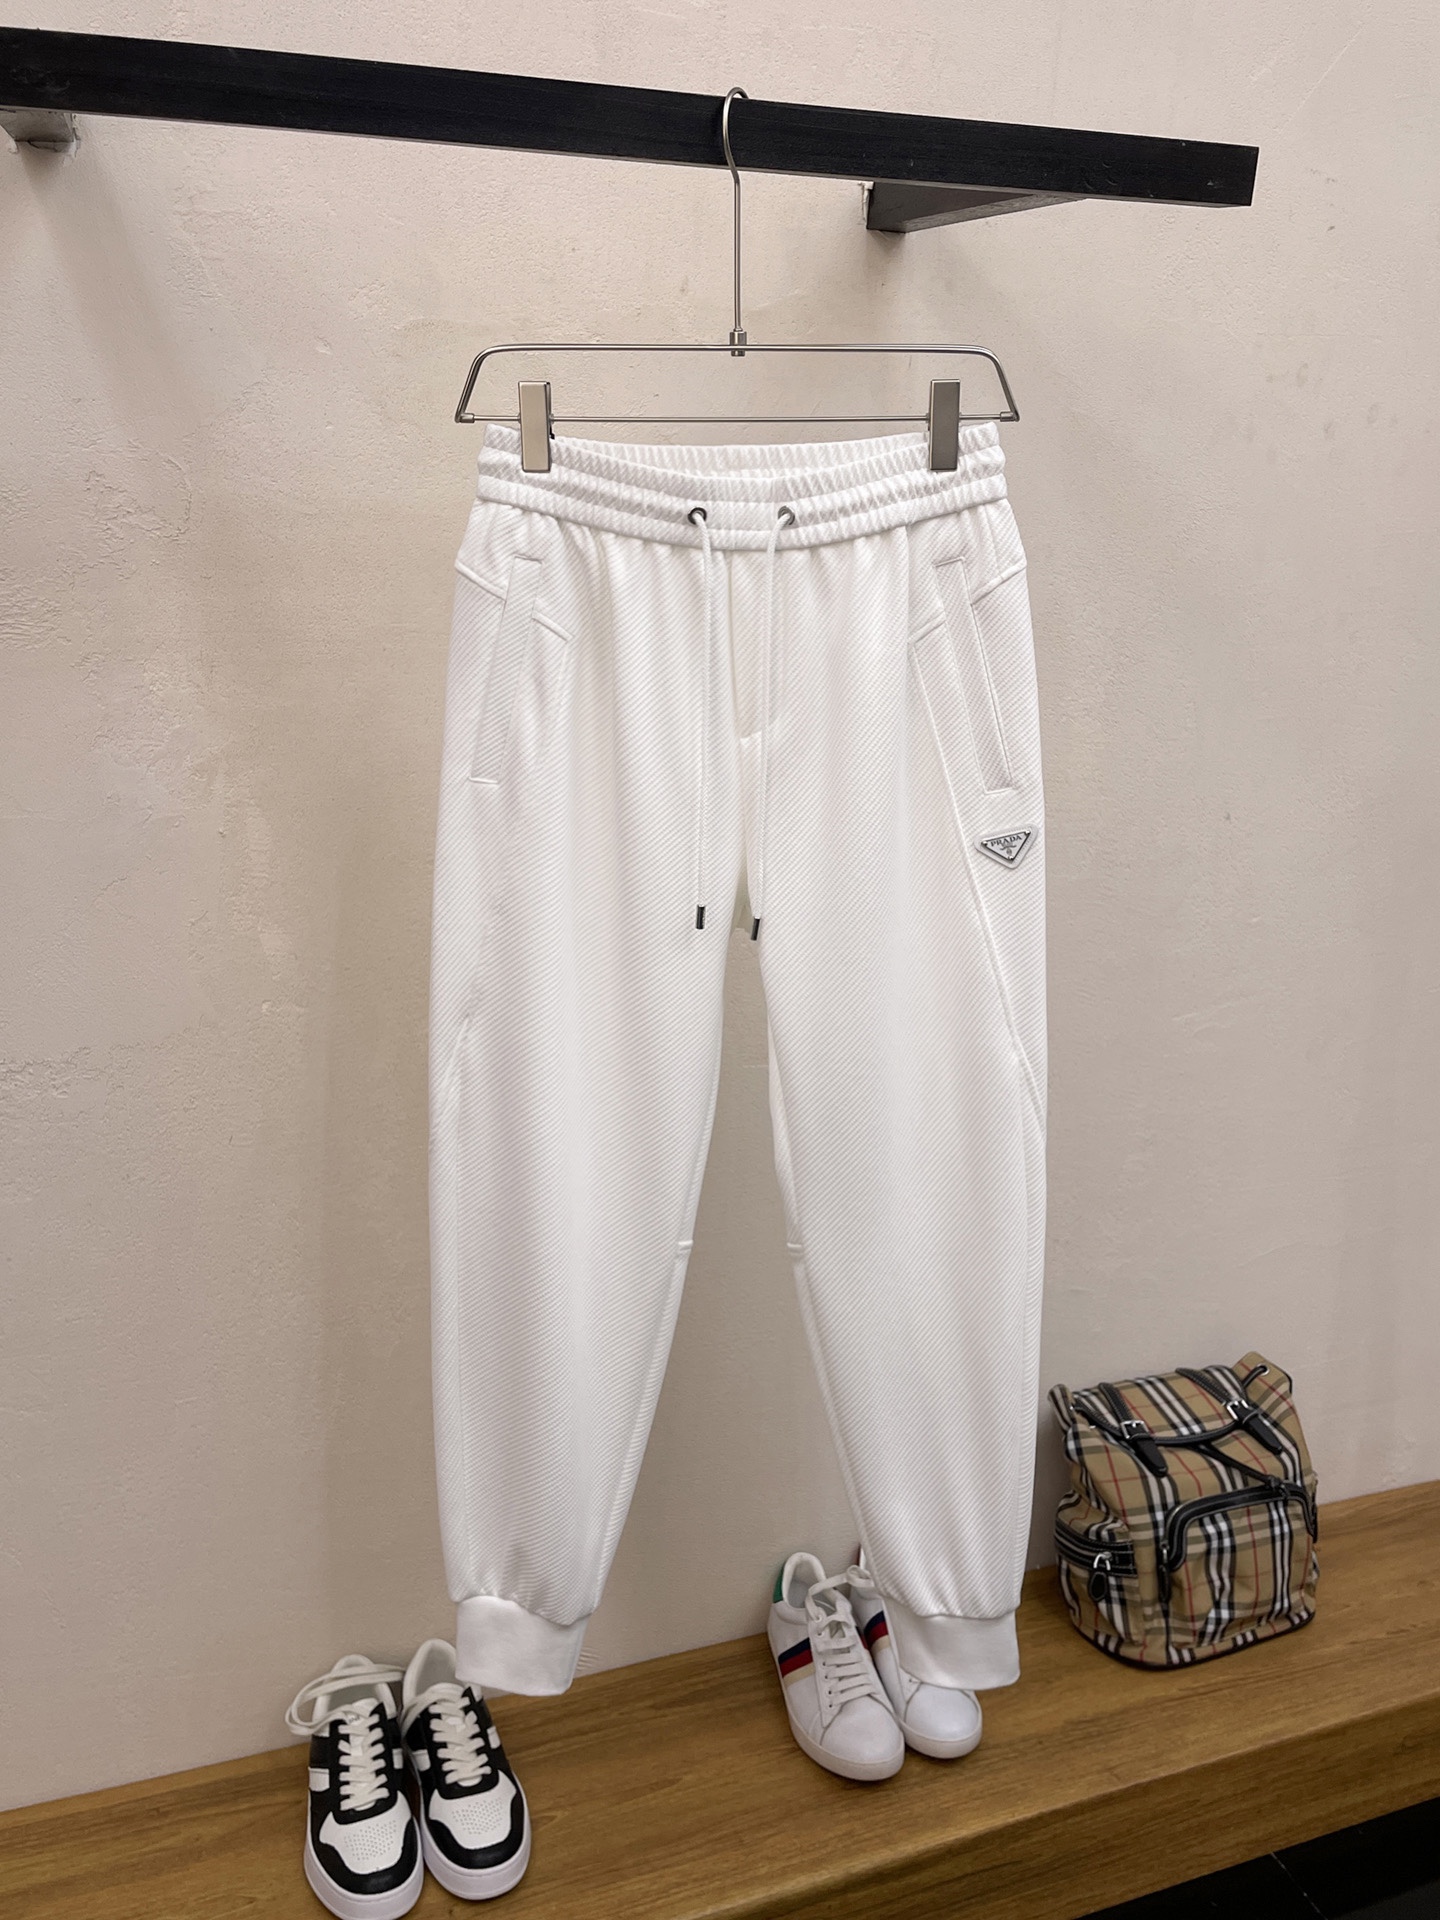 Prada Clothing Pants & Trousers Spring Collection Casual